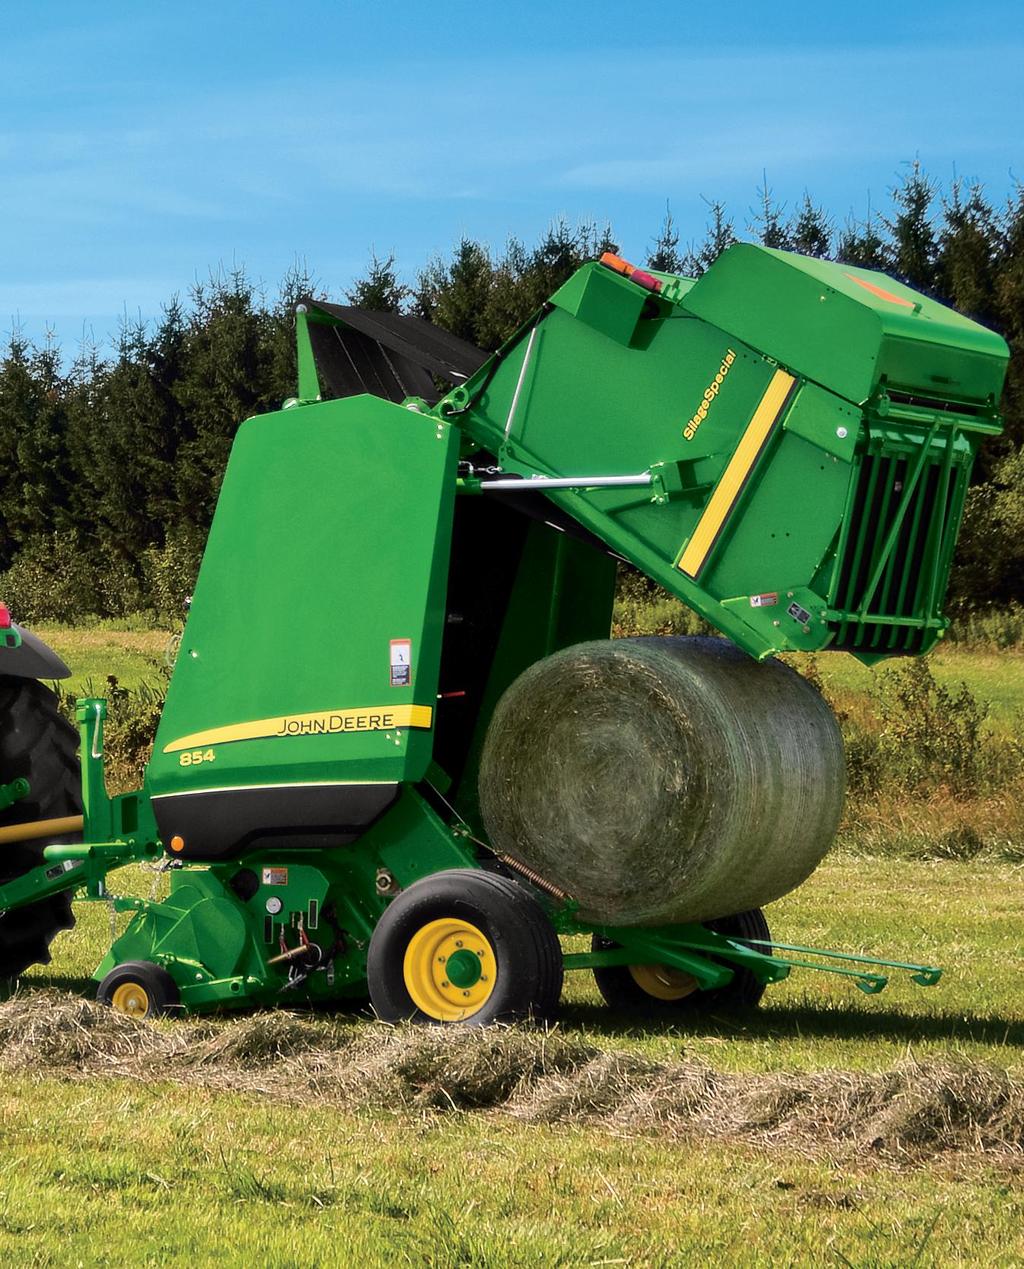 Round Balers Silage Special Round Balers Packs a lot of weight Go ahead. Keep eating up those long, heavy silage windrows. John Deere Silage Specials can really pack it in.